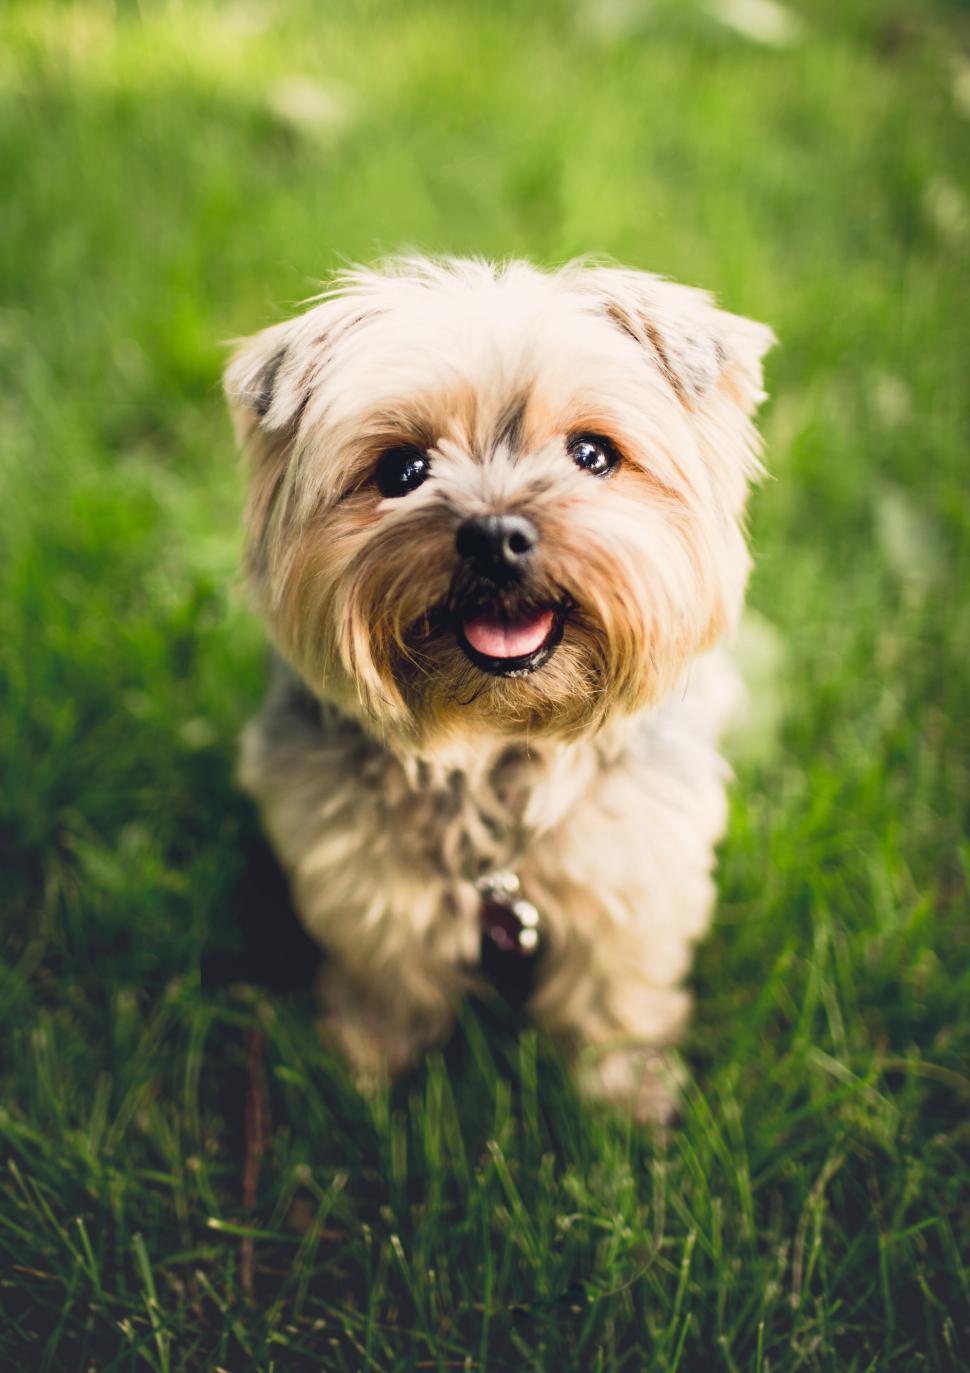 Free Image of A small dog sitting in grass 